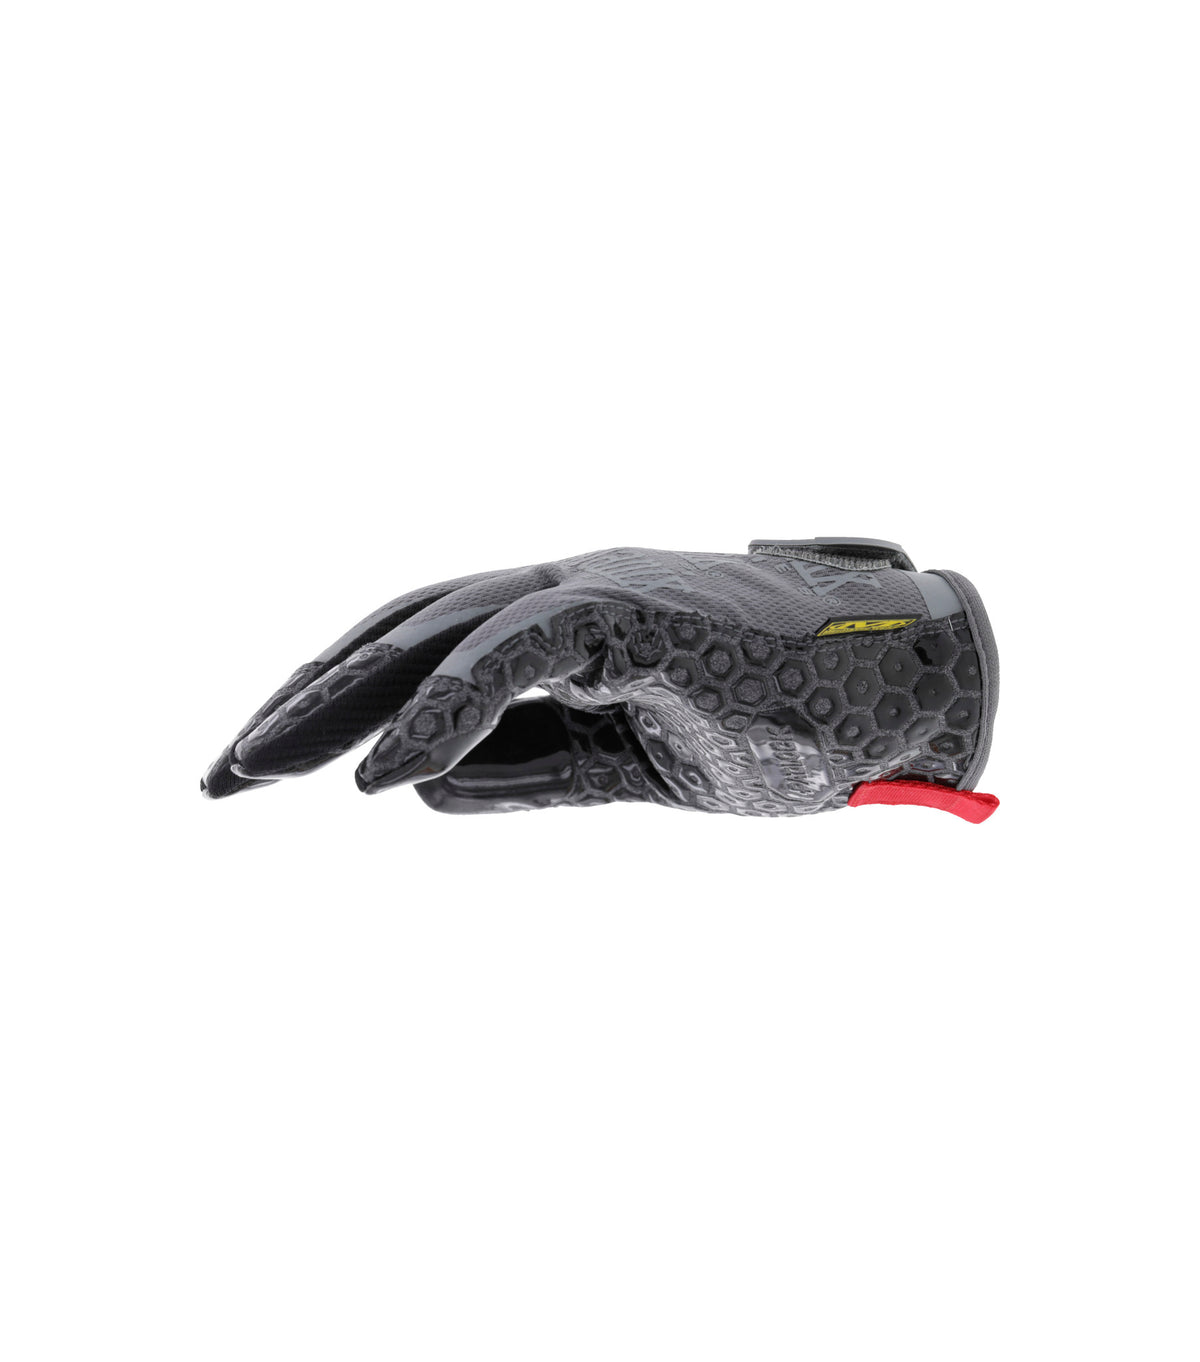 Palm-side view of Mechanix Wear Box Cutter™ gloves displaying the Padlock™ no-slip silicon grip and synthetic leather for secure handling in maintenance and repair work.